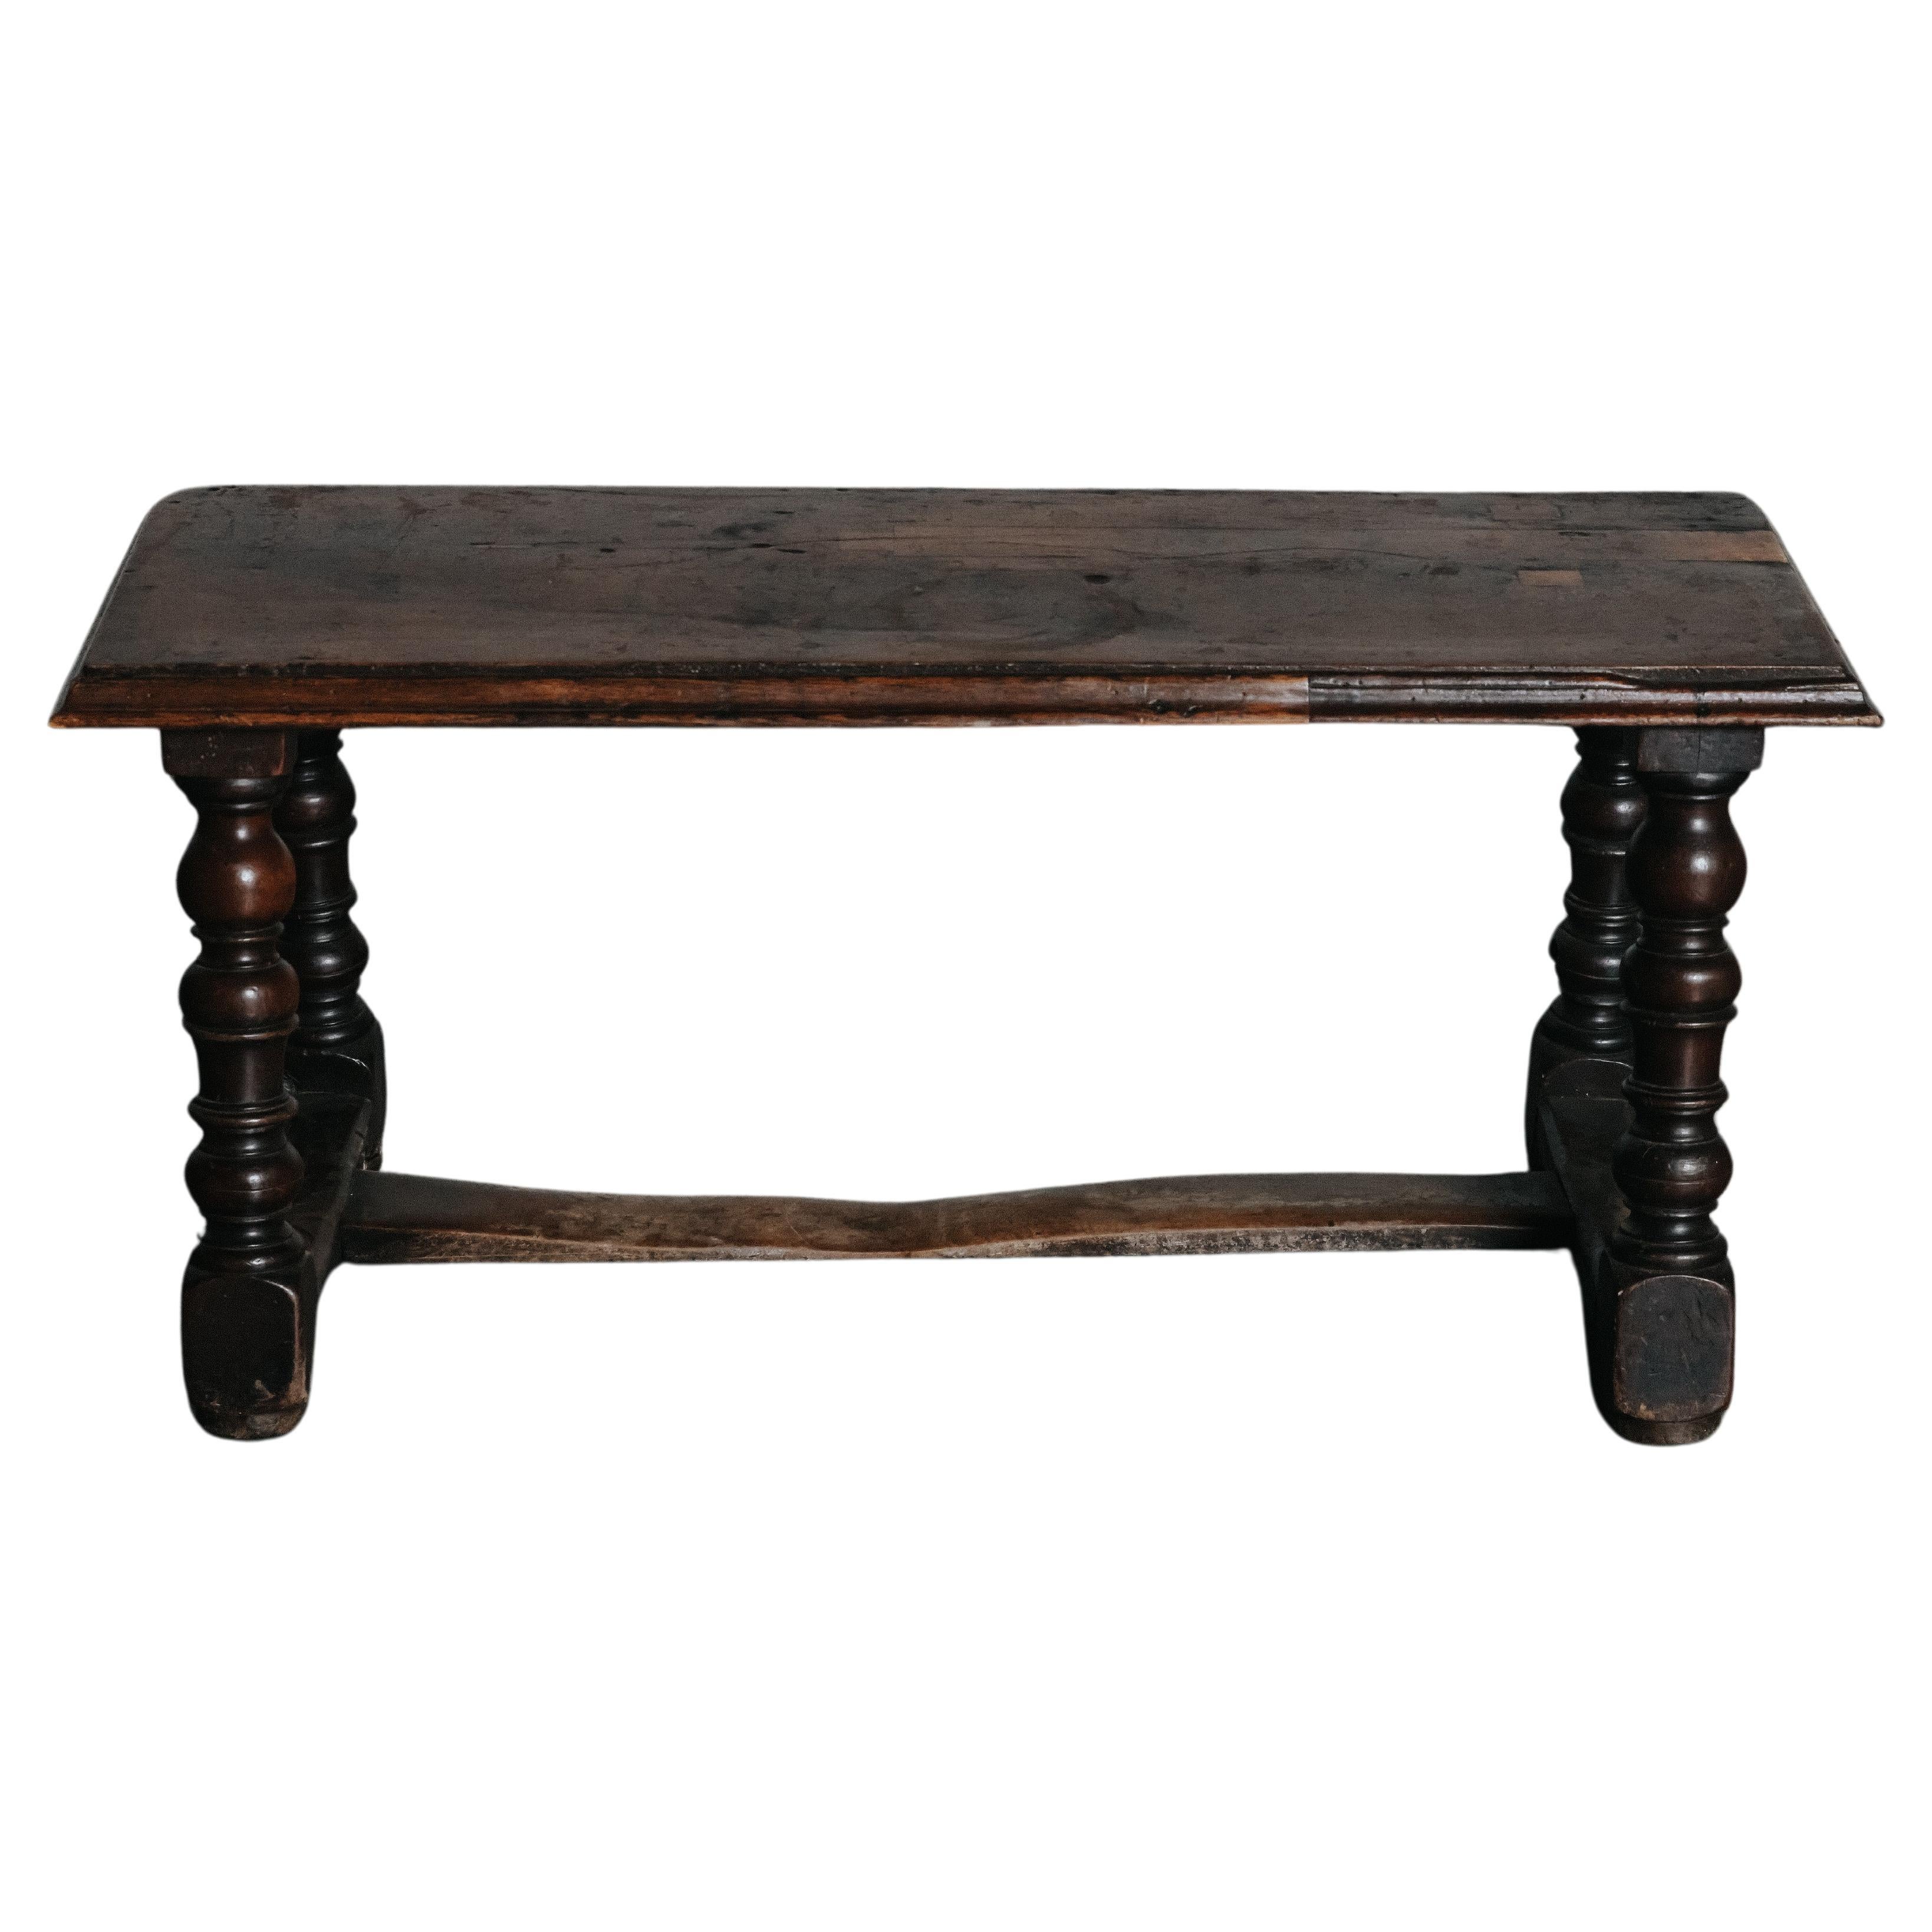 Early Walnut Side Table From Italy, Circa 1800